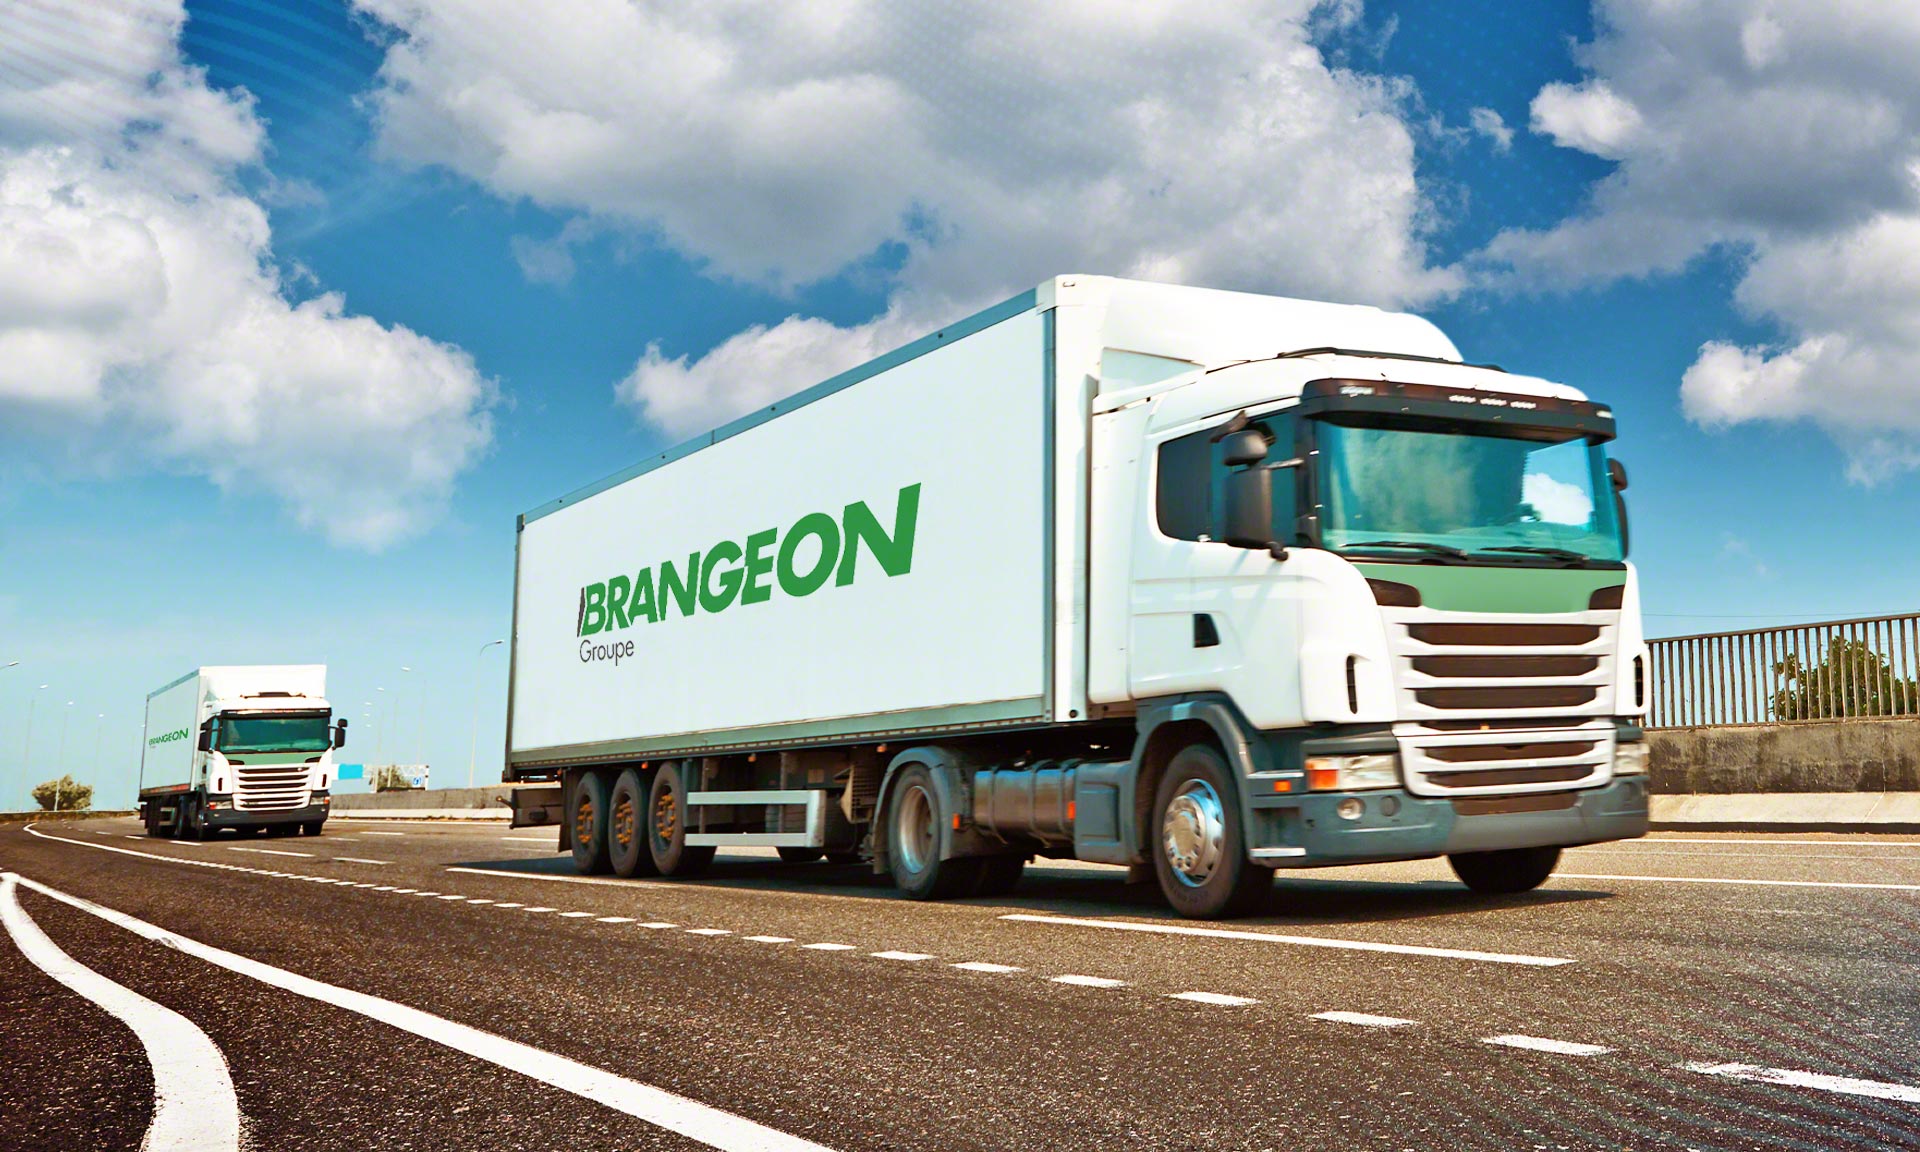 Brangeon to control its warehouse operations with Easy WMS from Mecalux